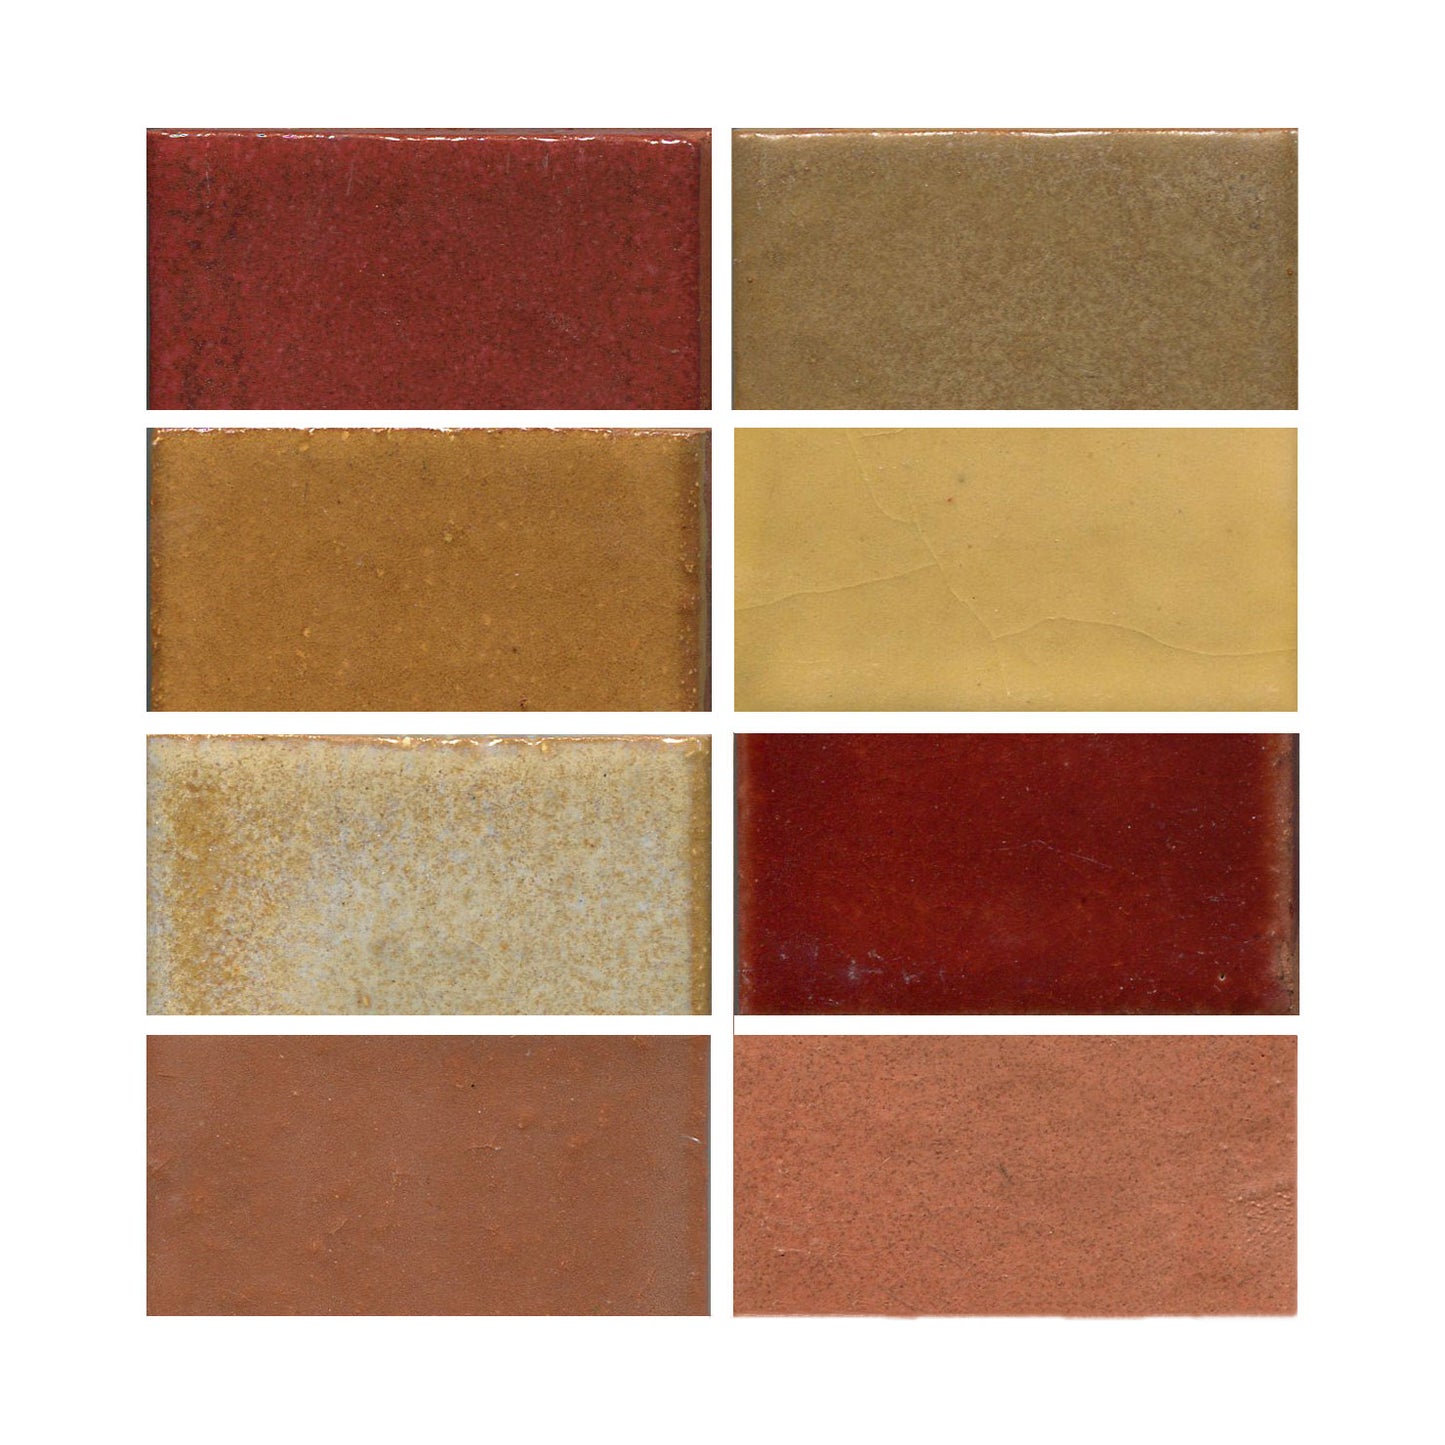 3 x 6" Warm Colors (10 SF Available)